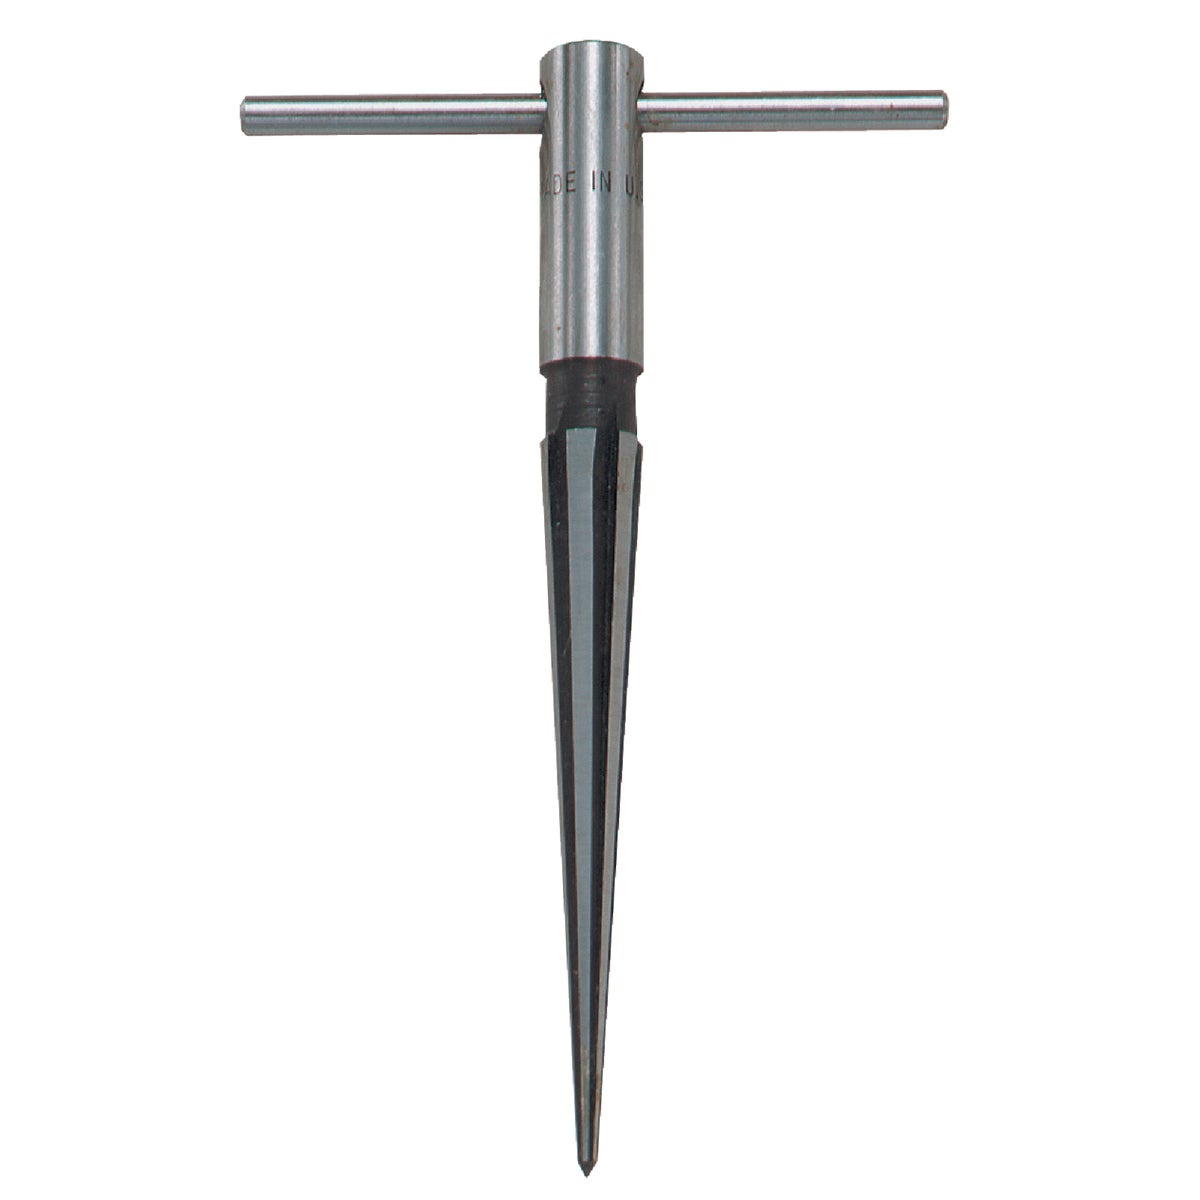 Item 300314, The #130 T-handle Reamer is ideal for removing burrs from cut pipe, tubing 